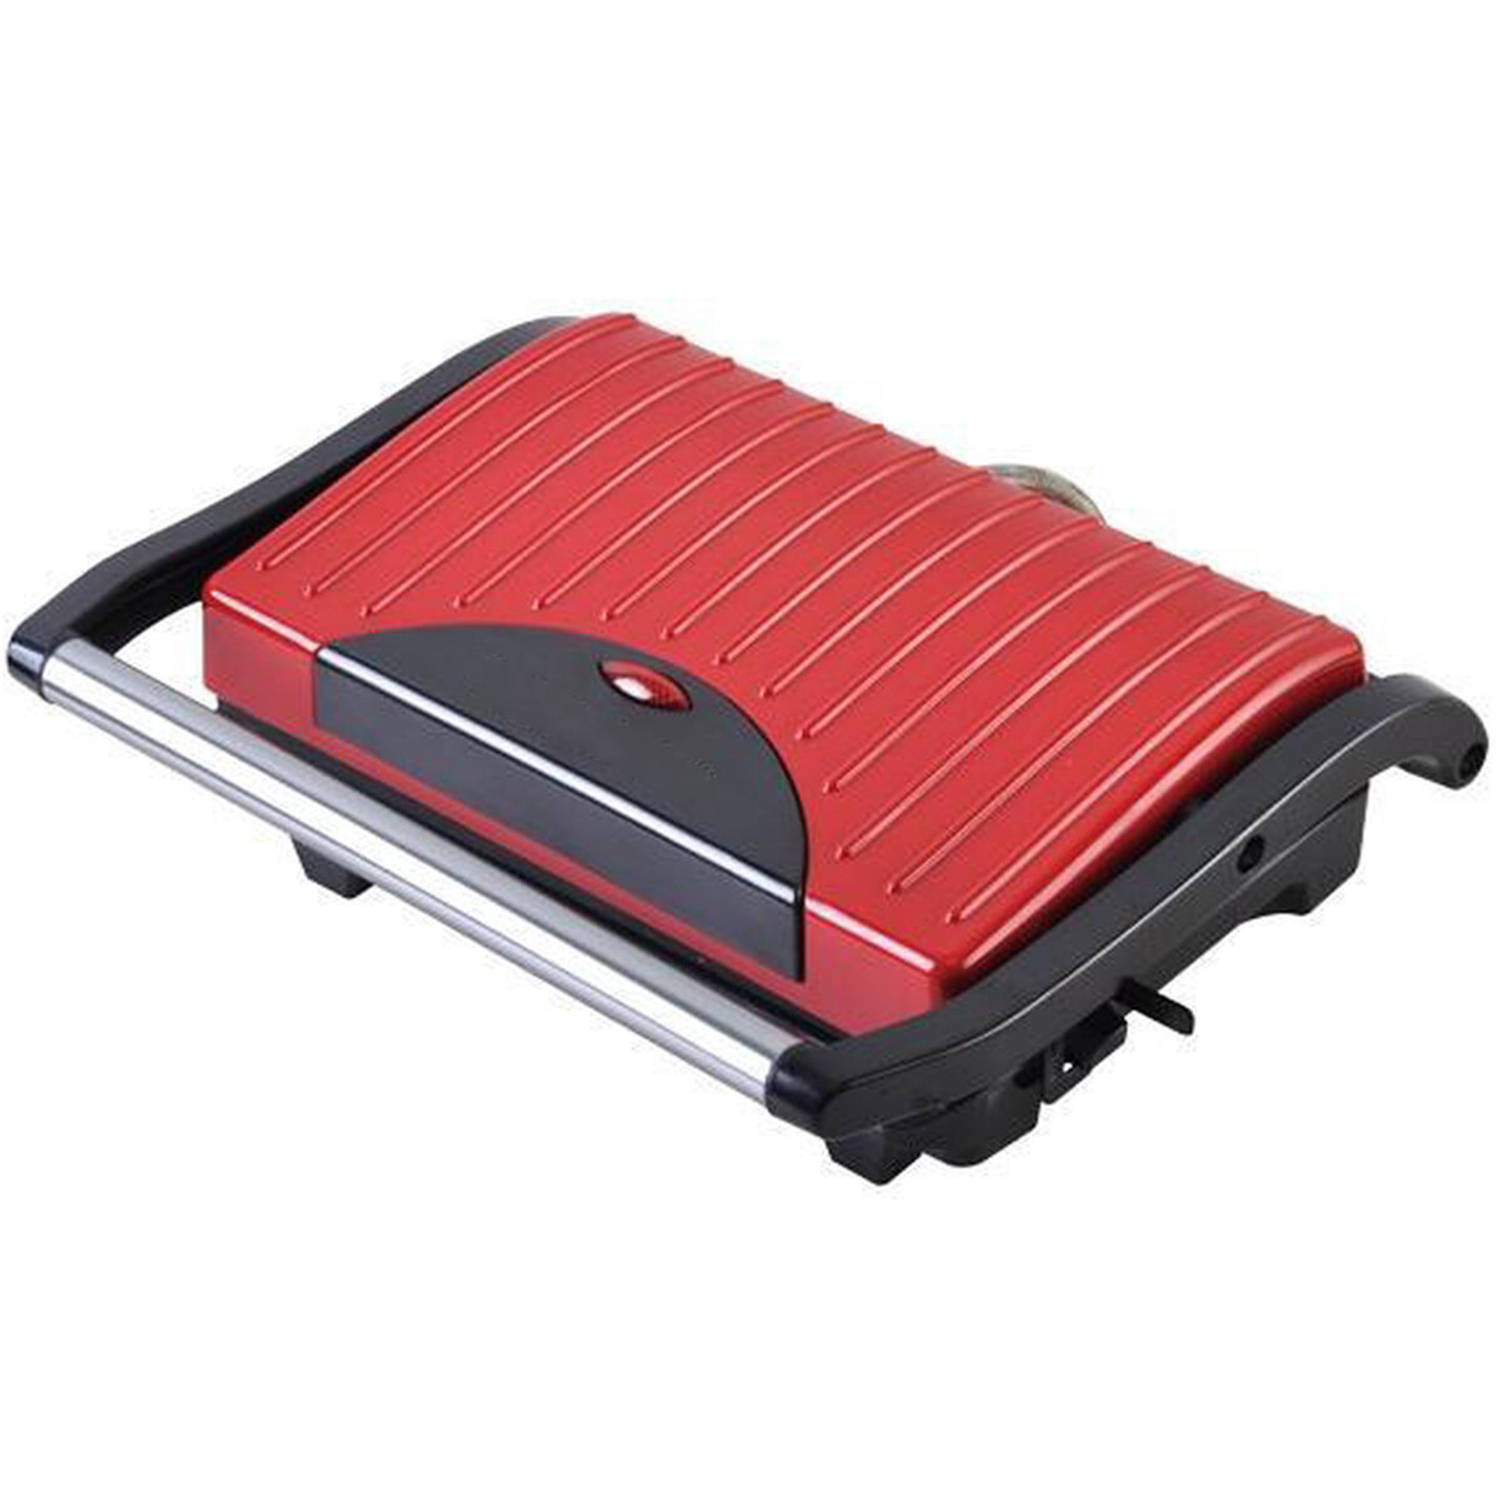 Contactgrill Tosti Apparaat Tosti Ijzer Aigi Wirmo Cool Touch Rvs Rood